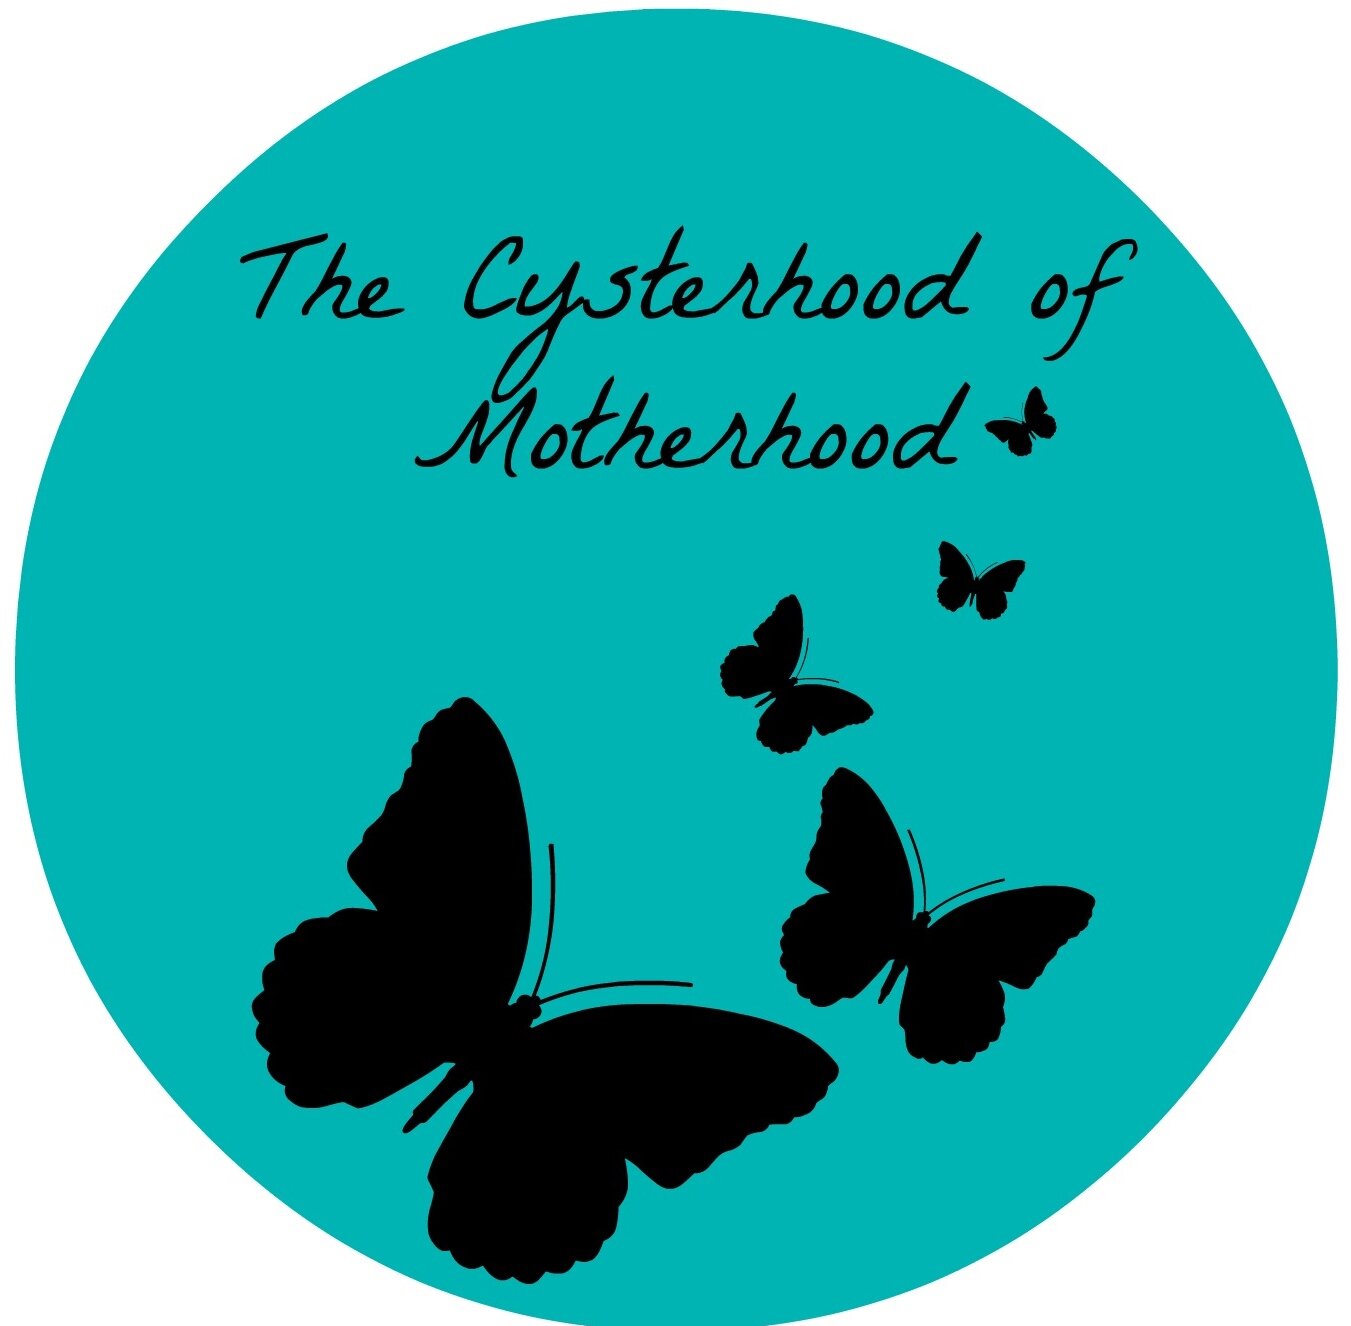 The official twitter of http://t.co/RTdYXQVhQZ! Fighting PCOS and Infertility! #kicksomePCOSbutt #cystersupport